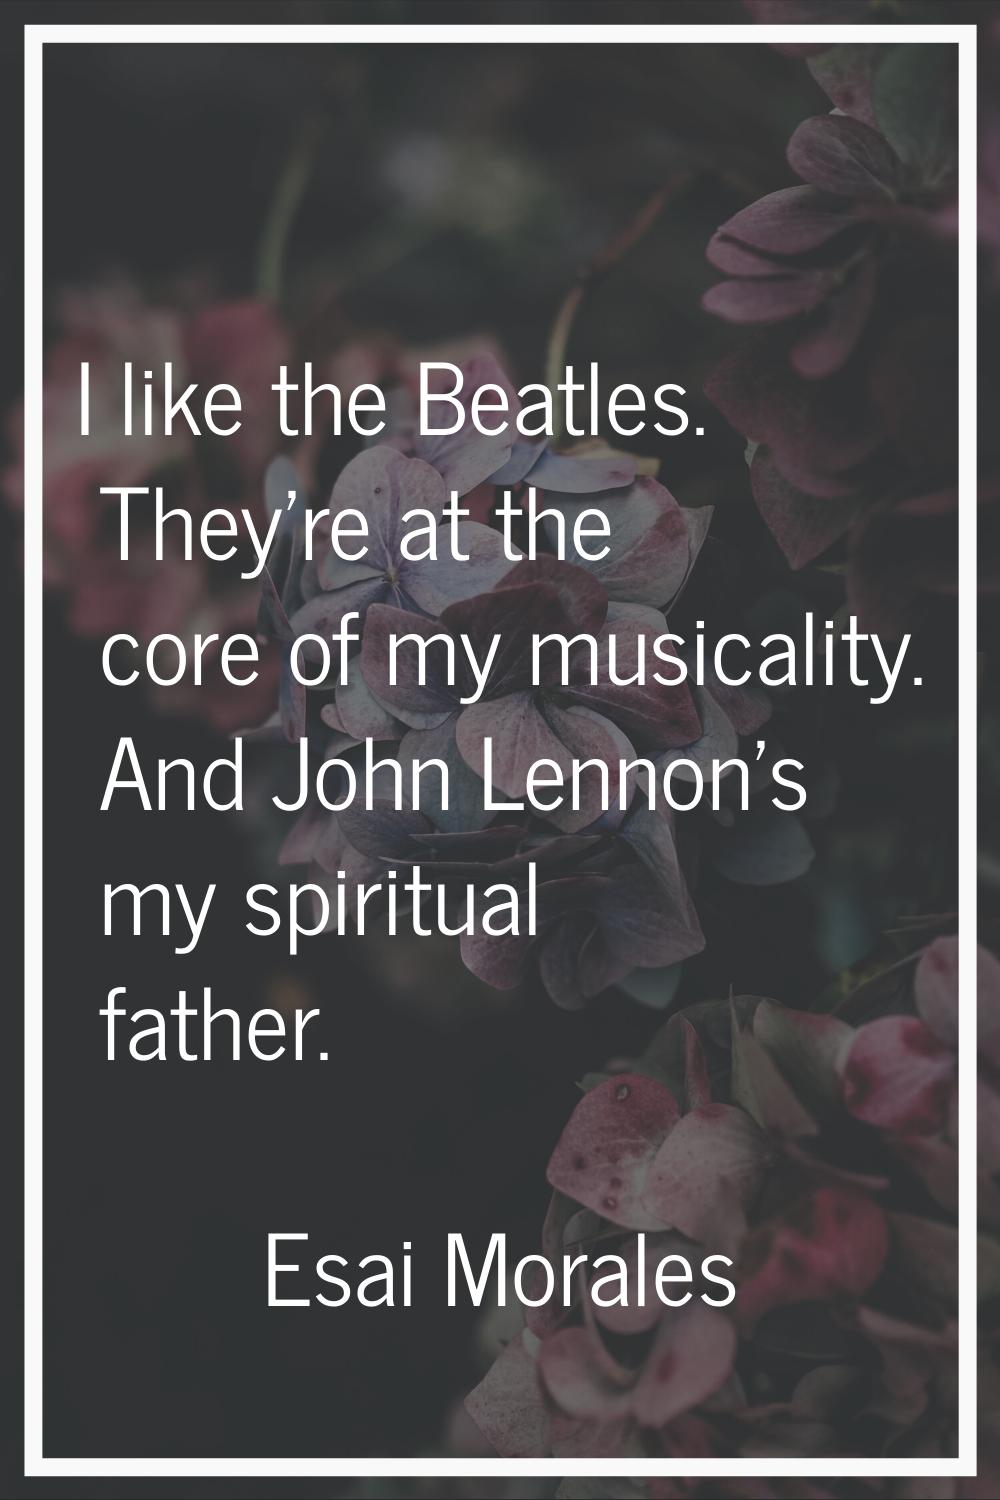 I like the Beatles. They're at the core of my musicality. And John Lennon's my spiritual father.